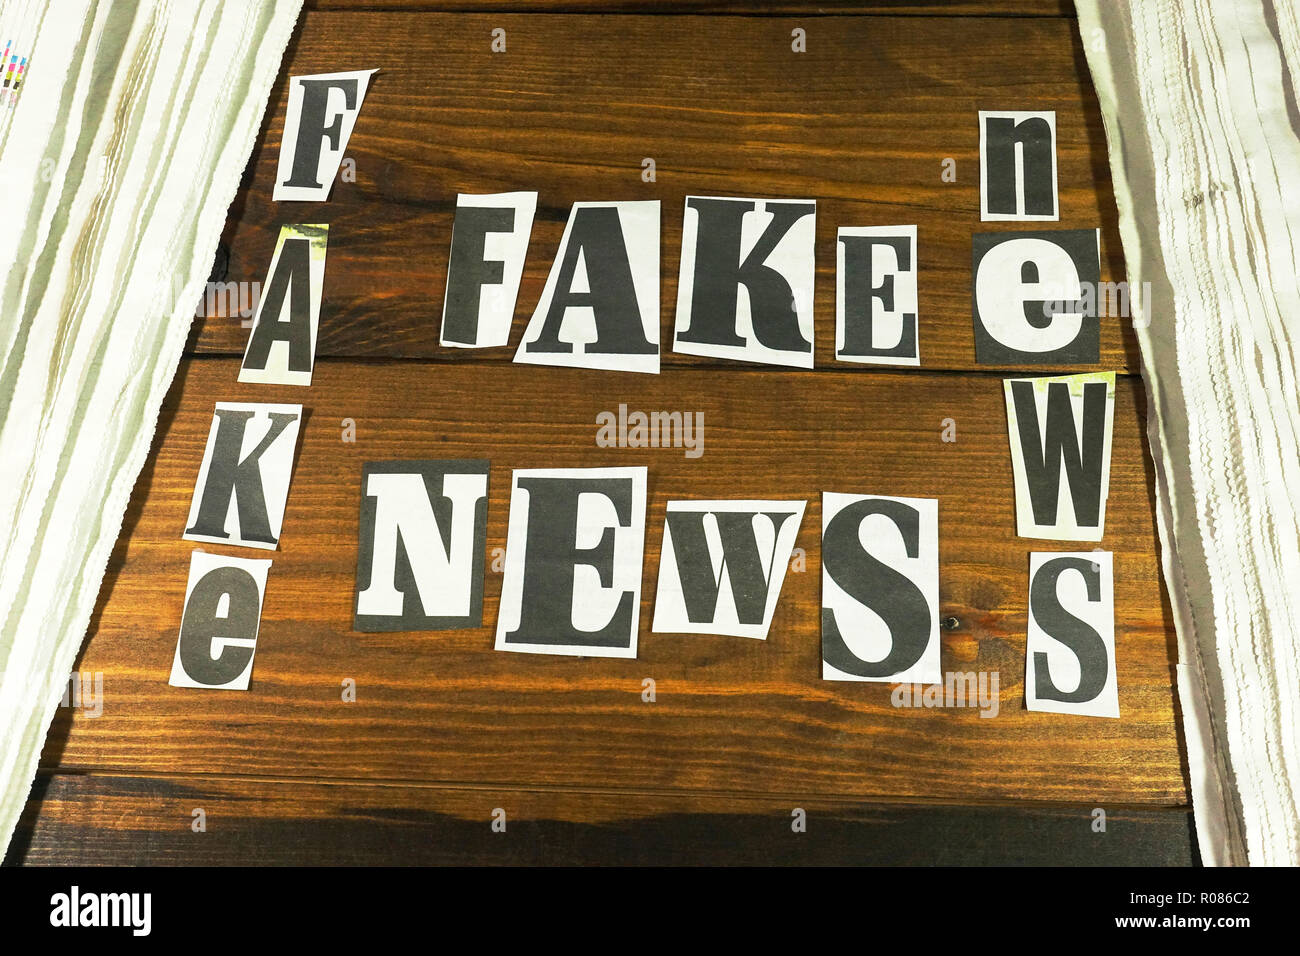 Disinformation and alternative facts. Newspaper letters used to spell out FAKE NEWS. Stock Photo